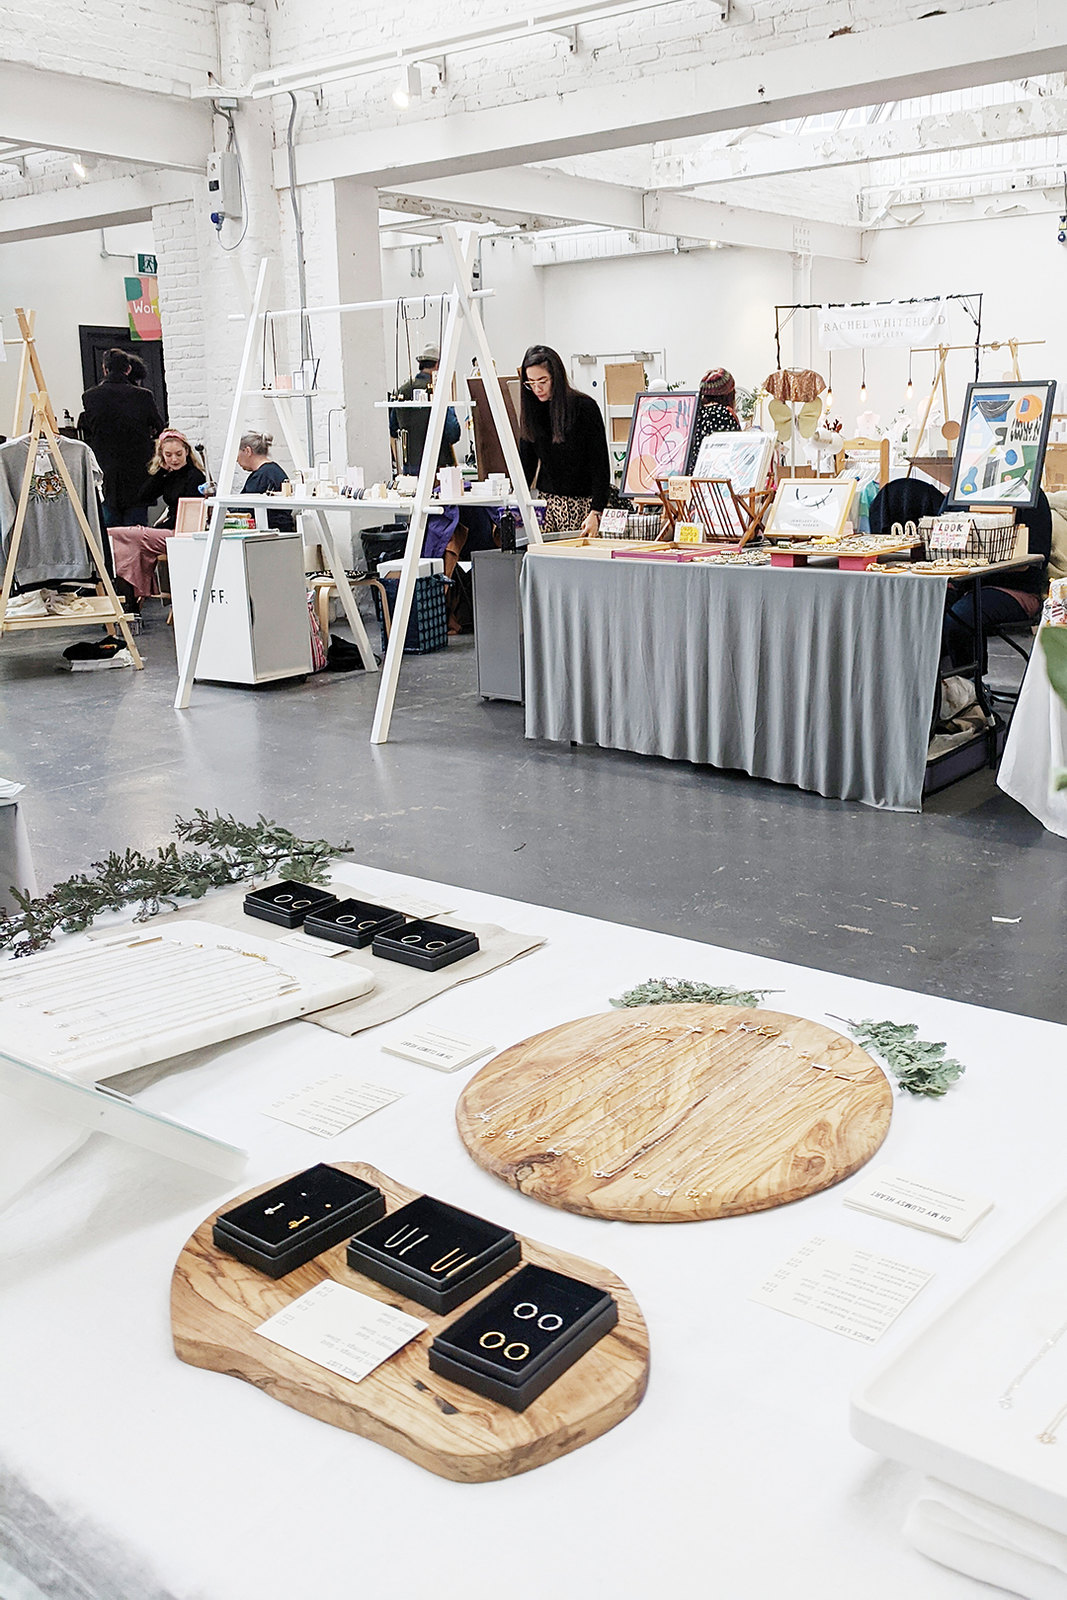 Favourite Makers at the Paperdolls Handmade Market